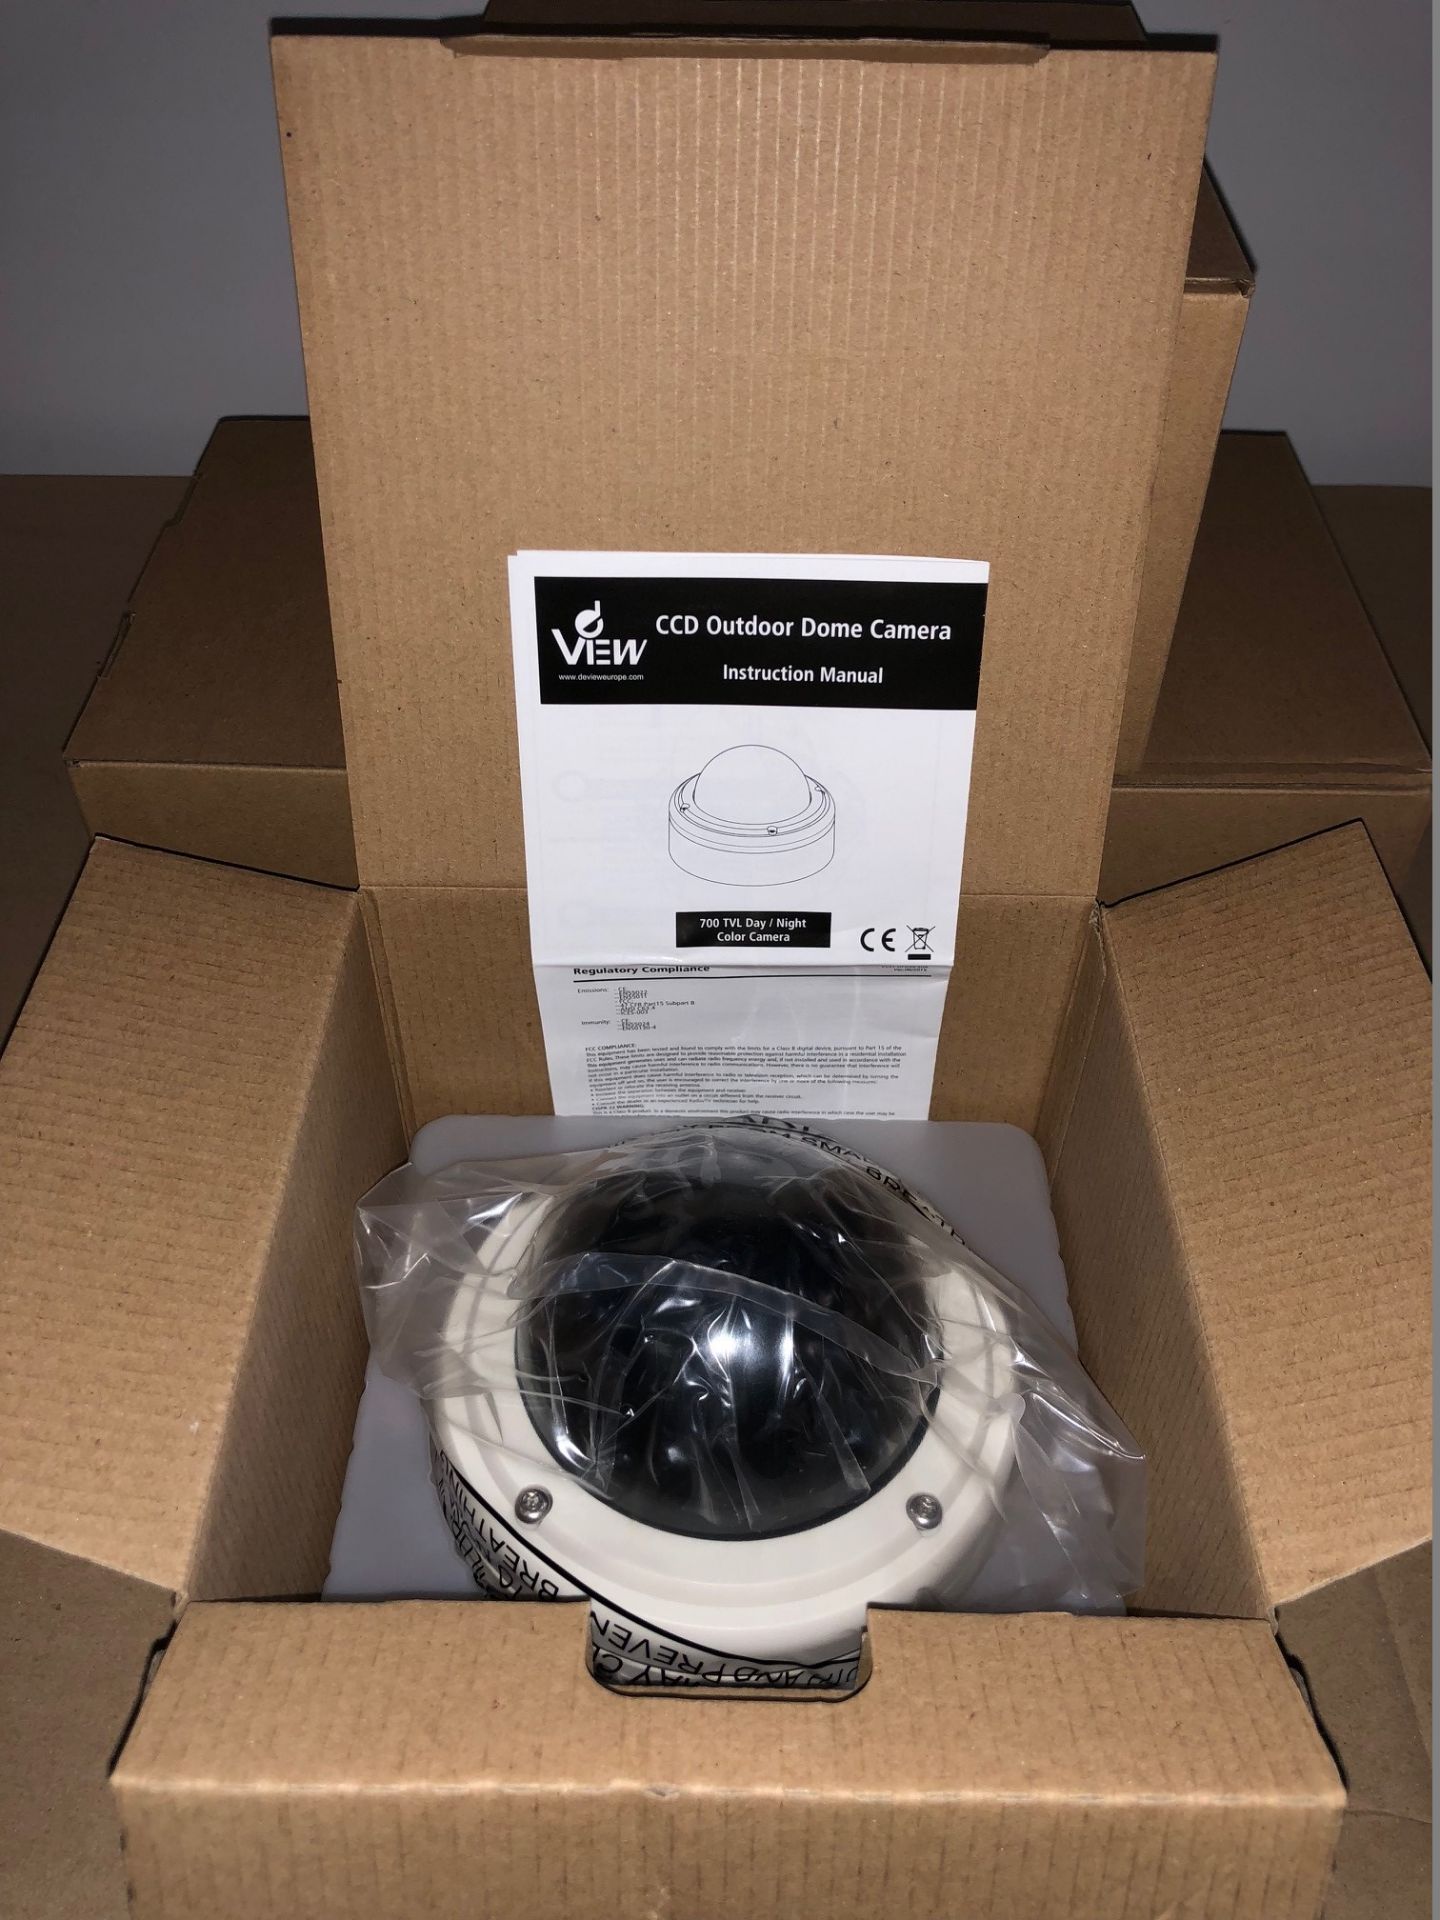 4 x dView CCD Outdoor Dome Cameras - 700TVL, SDN, PAL, 2.8-10mm - Model VDP20SP7028V10T (Brand New &